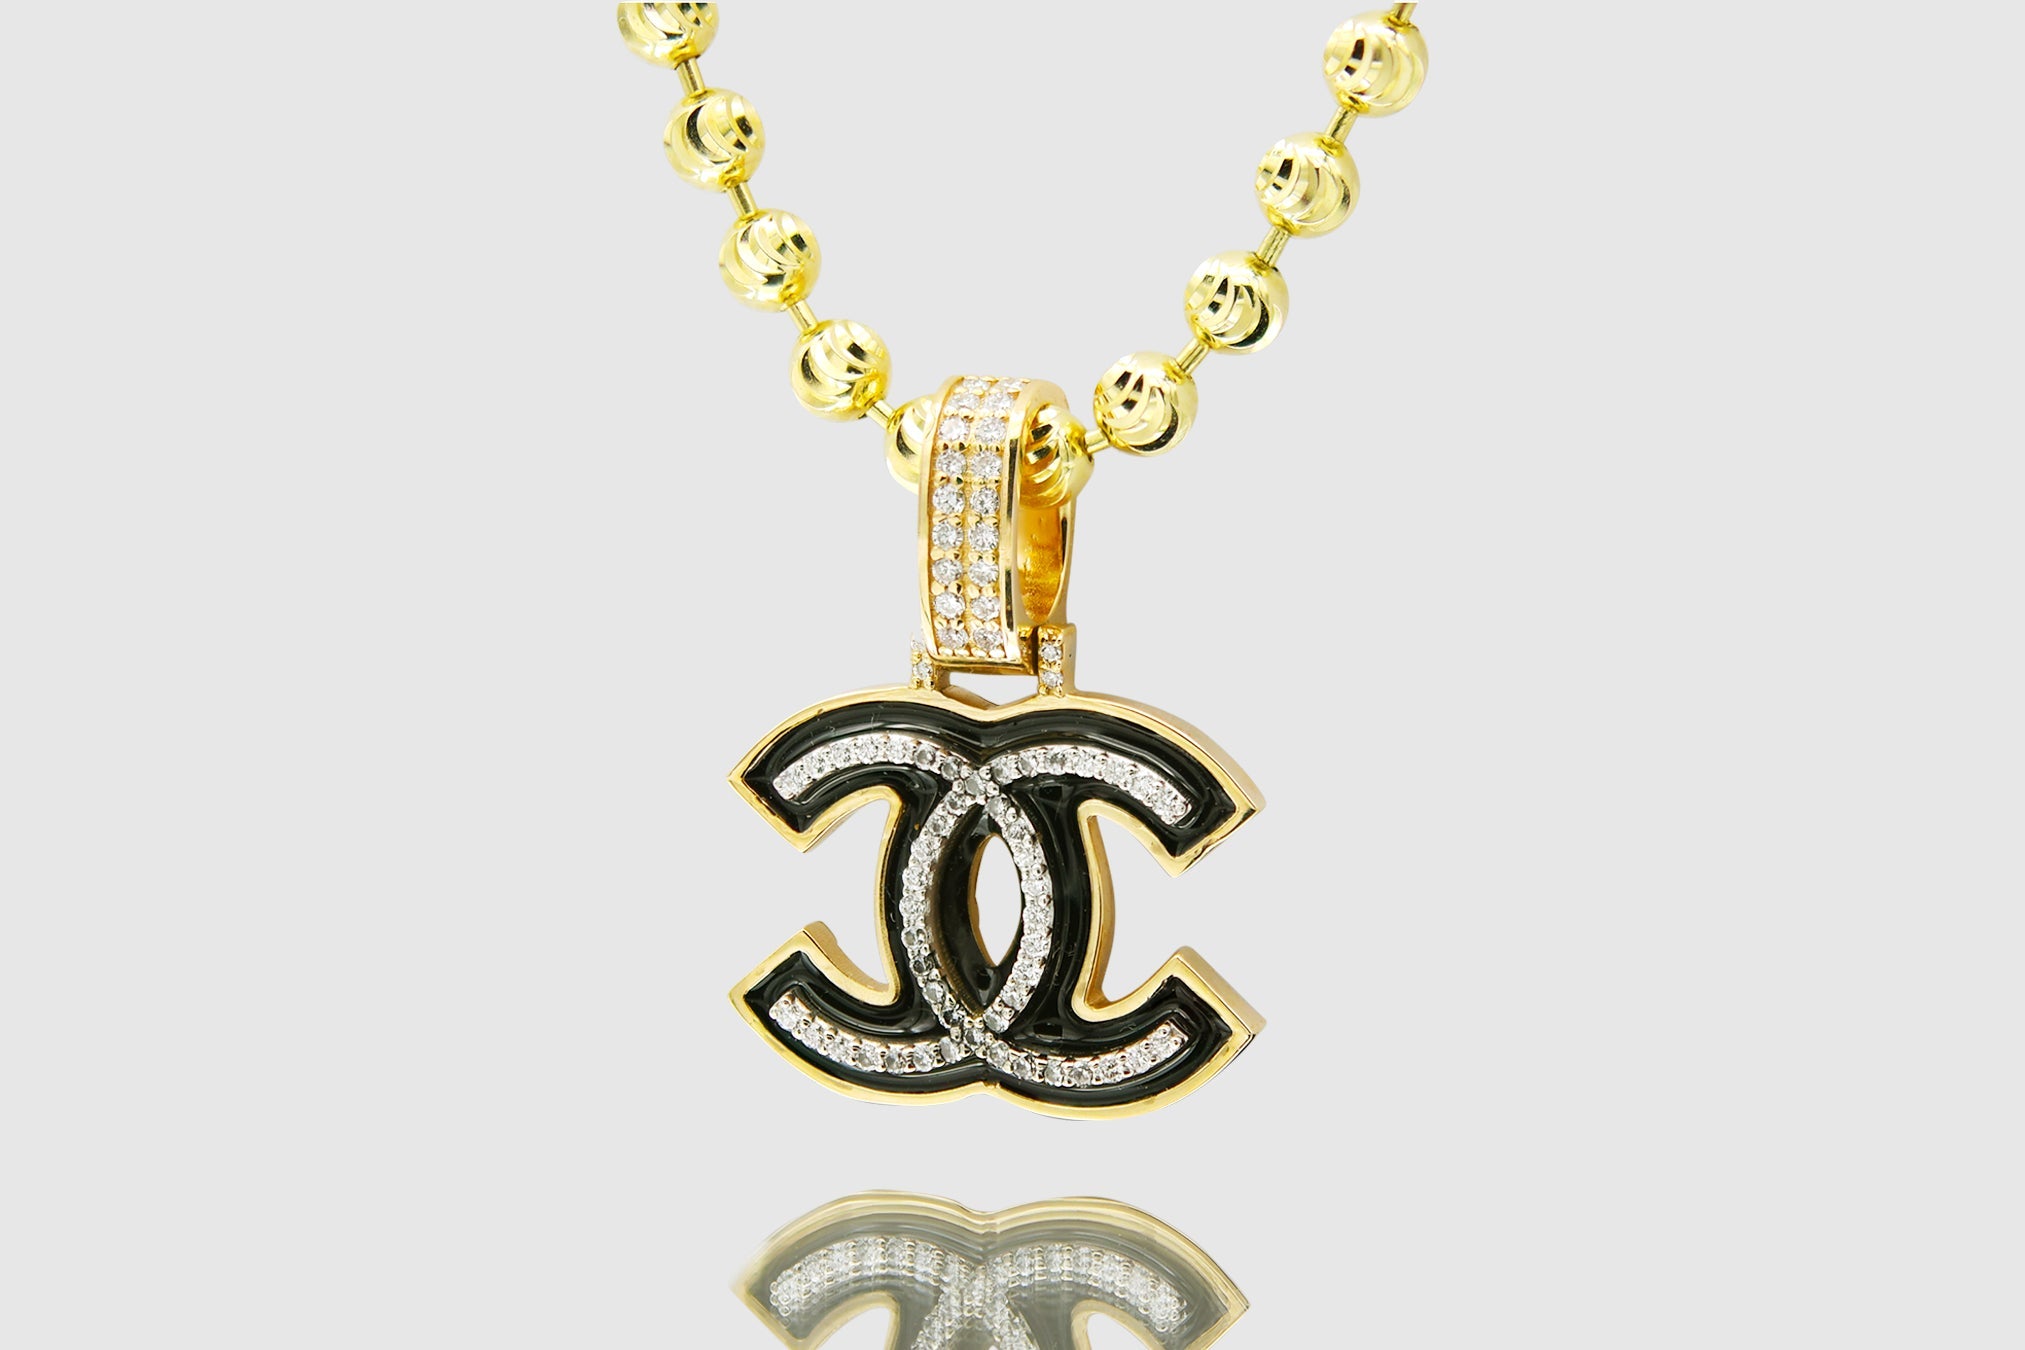 Chanel Light Gold Tone Wax Seal Logo and Rhinestone Star Necklace